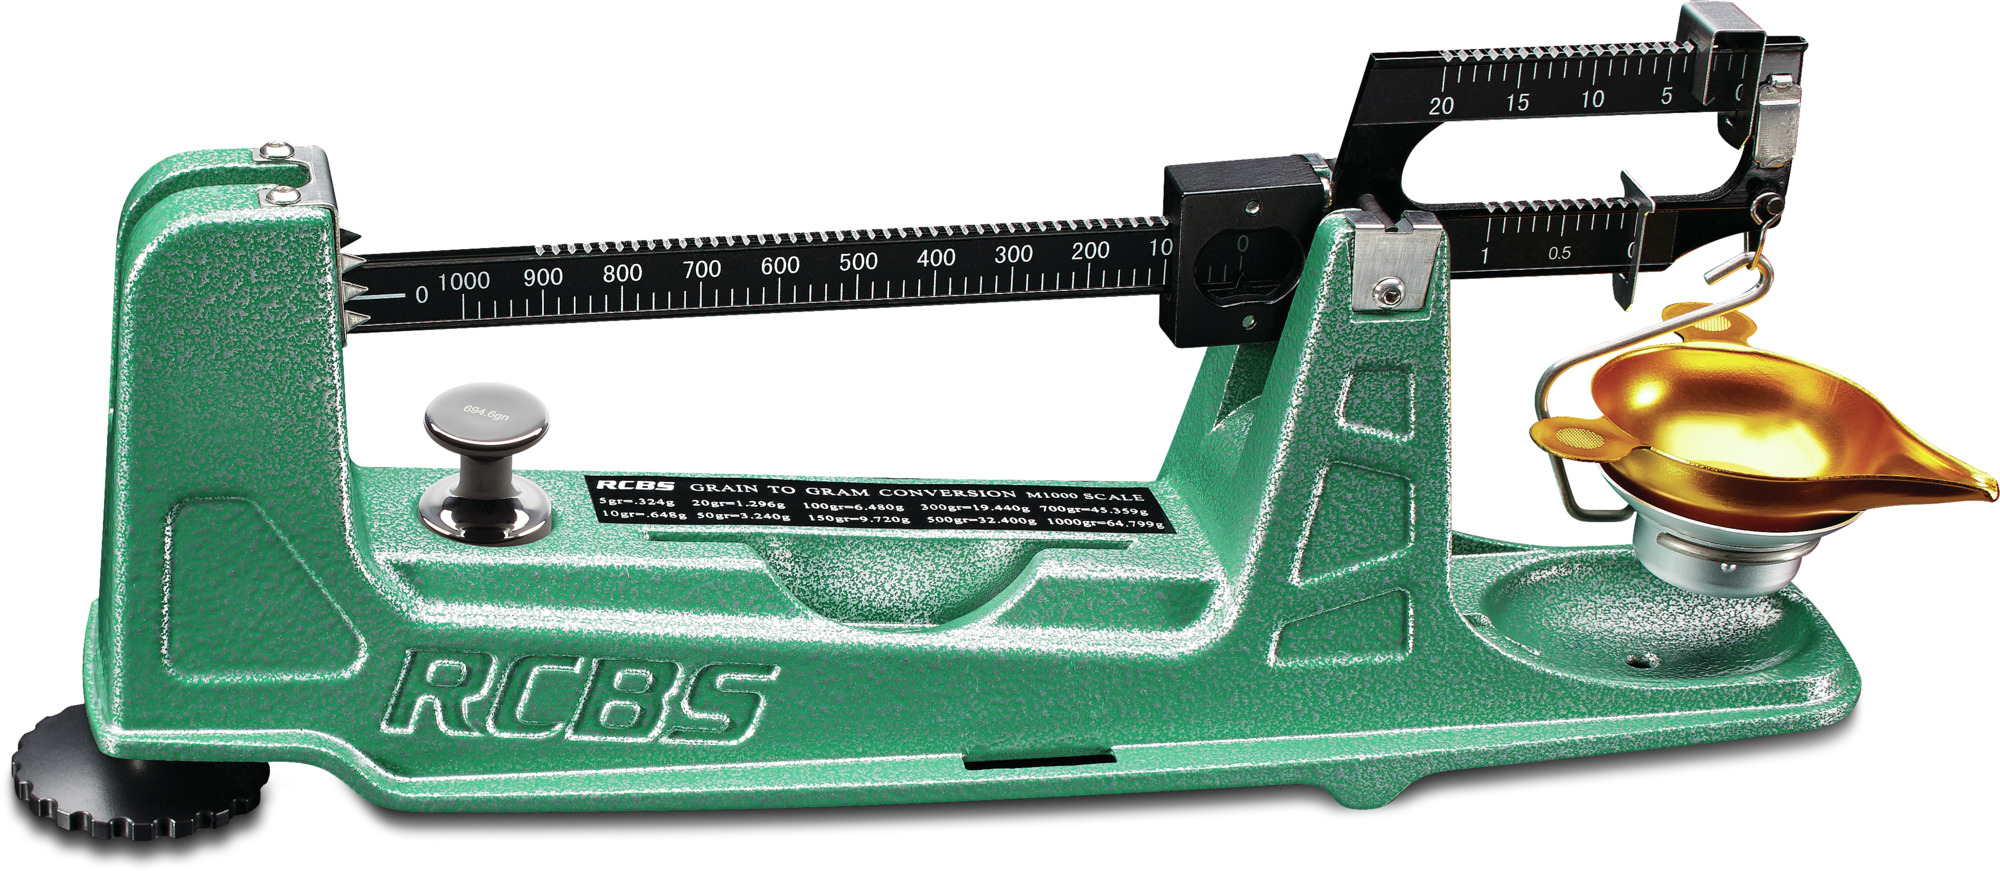 Reloading Scales / Powder Scales 